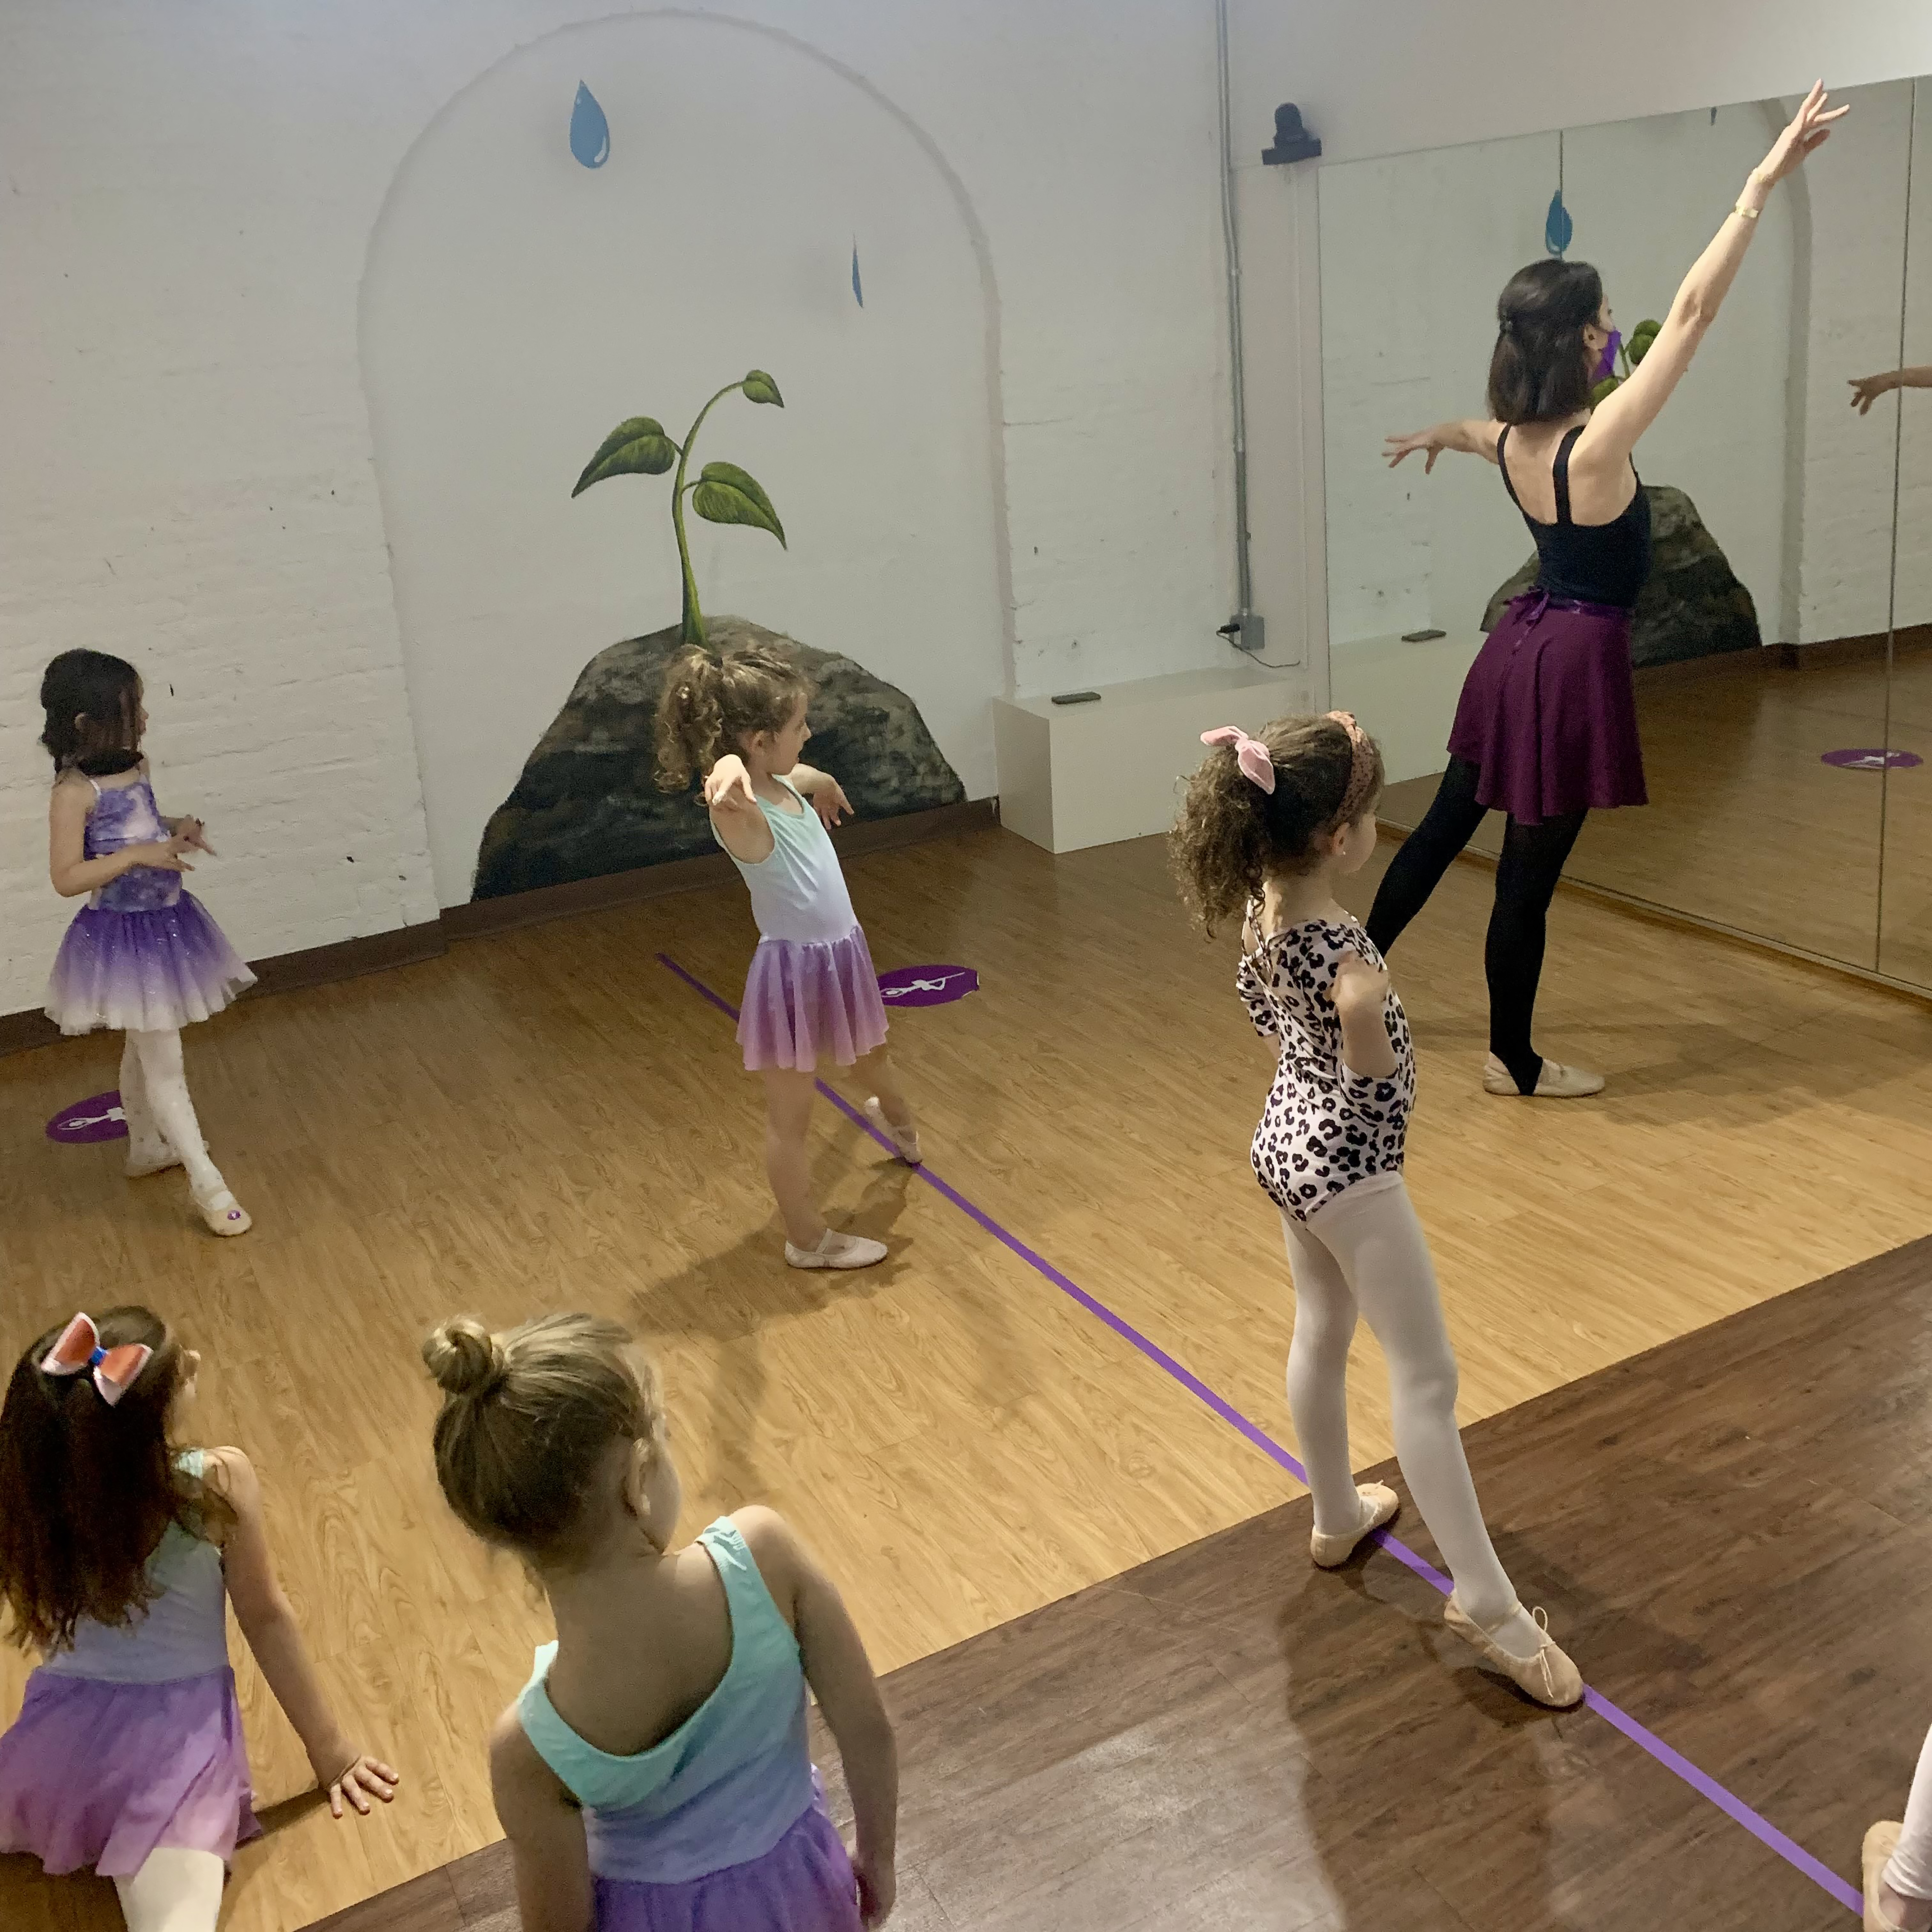 Rachel Cantor demonstrates for a group of young students at the front of a studio.